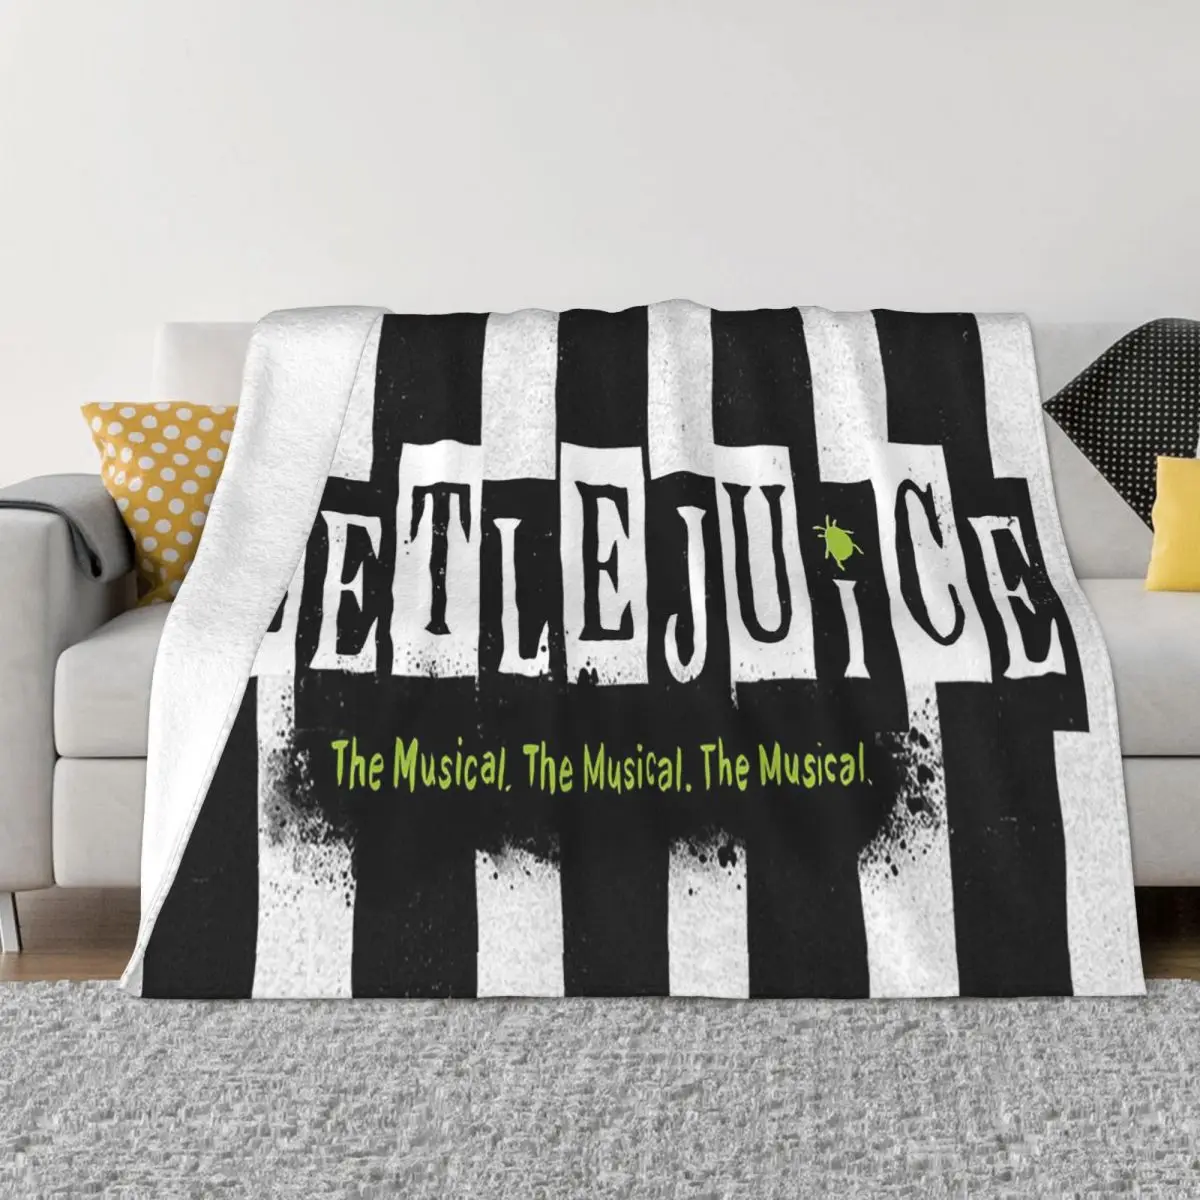 

Beetlejuice Horror Movie Blankets Fleece Printed Black And White Breathable Thin Throw Blanket for Sofa Bedroom Bedspread